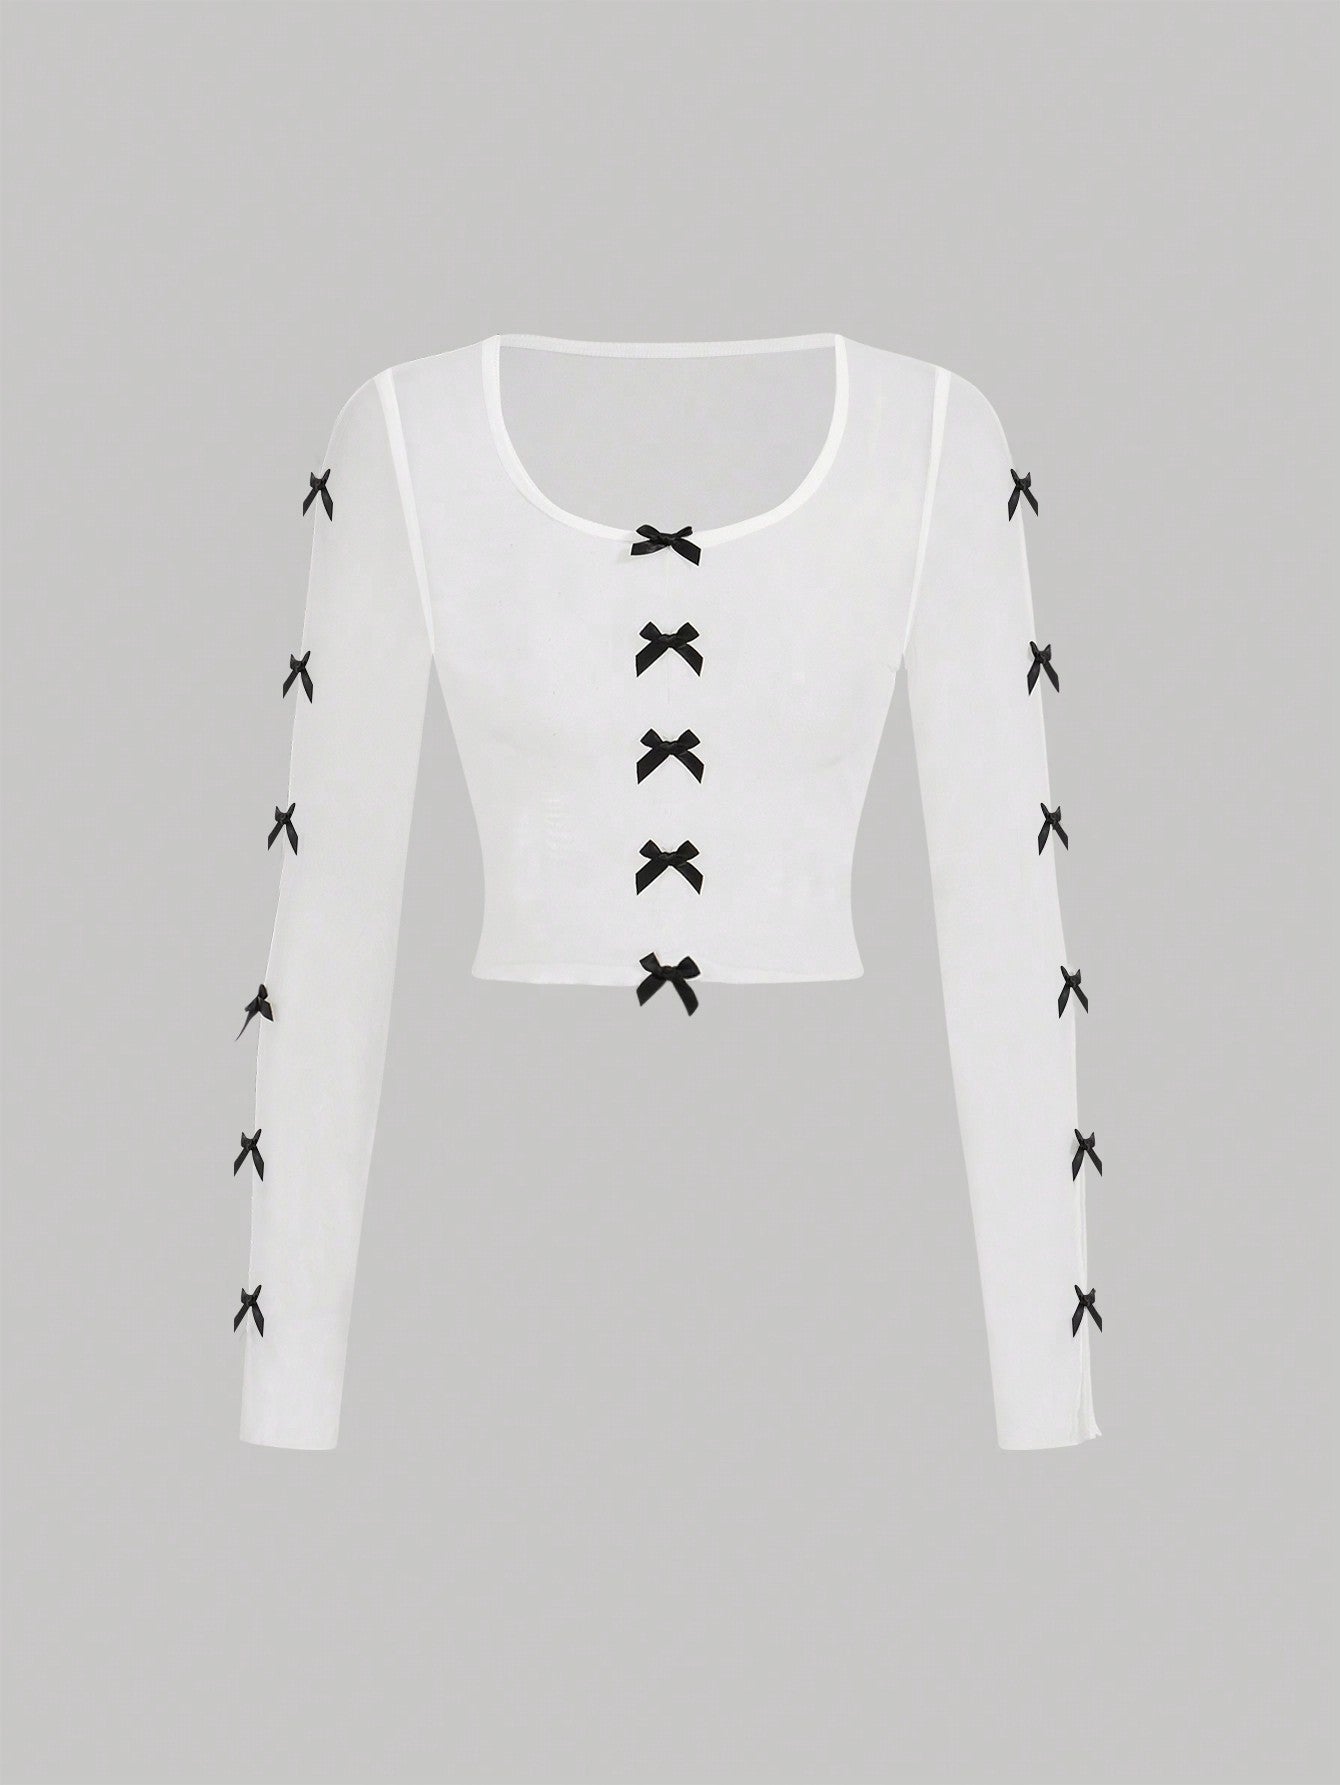 Women's Round Neck Long Sleeve Mesh Top With Bow Decoration Music Festival